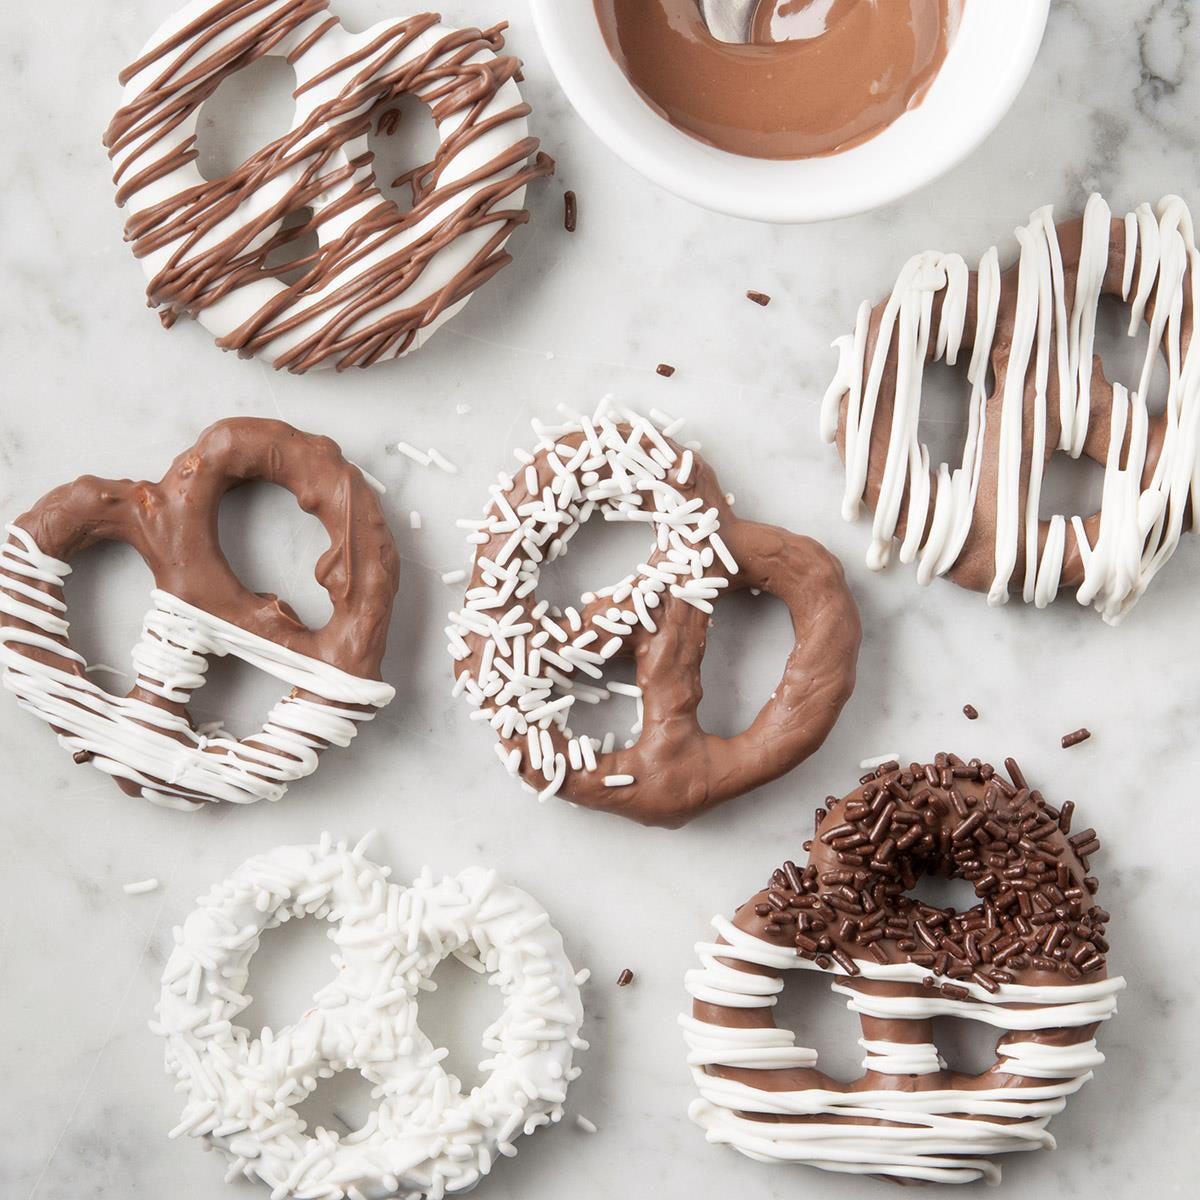 Easy Neighbor Christmas Gift Idea- Nutella and Pretzels with